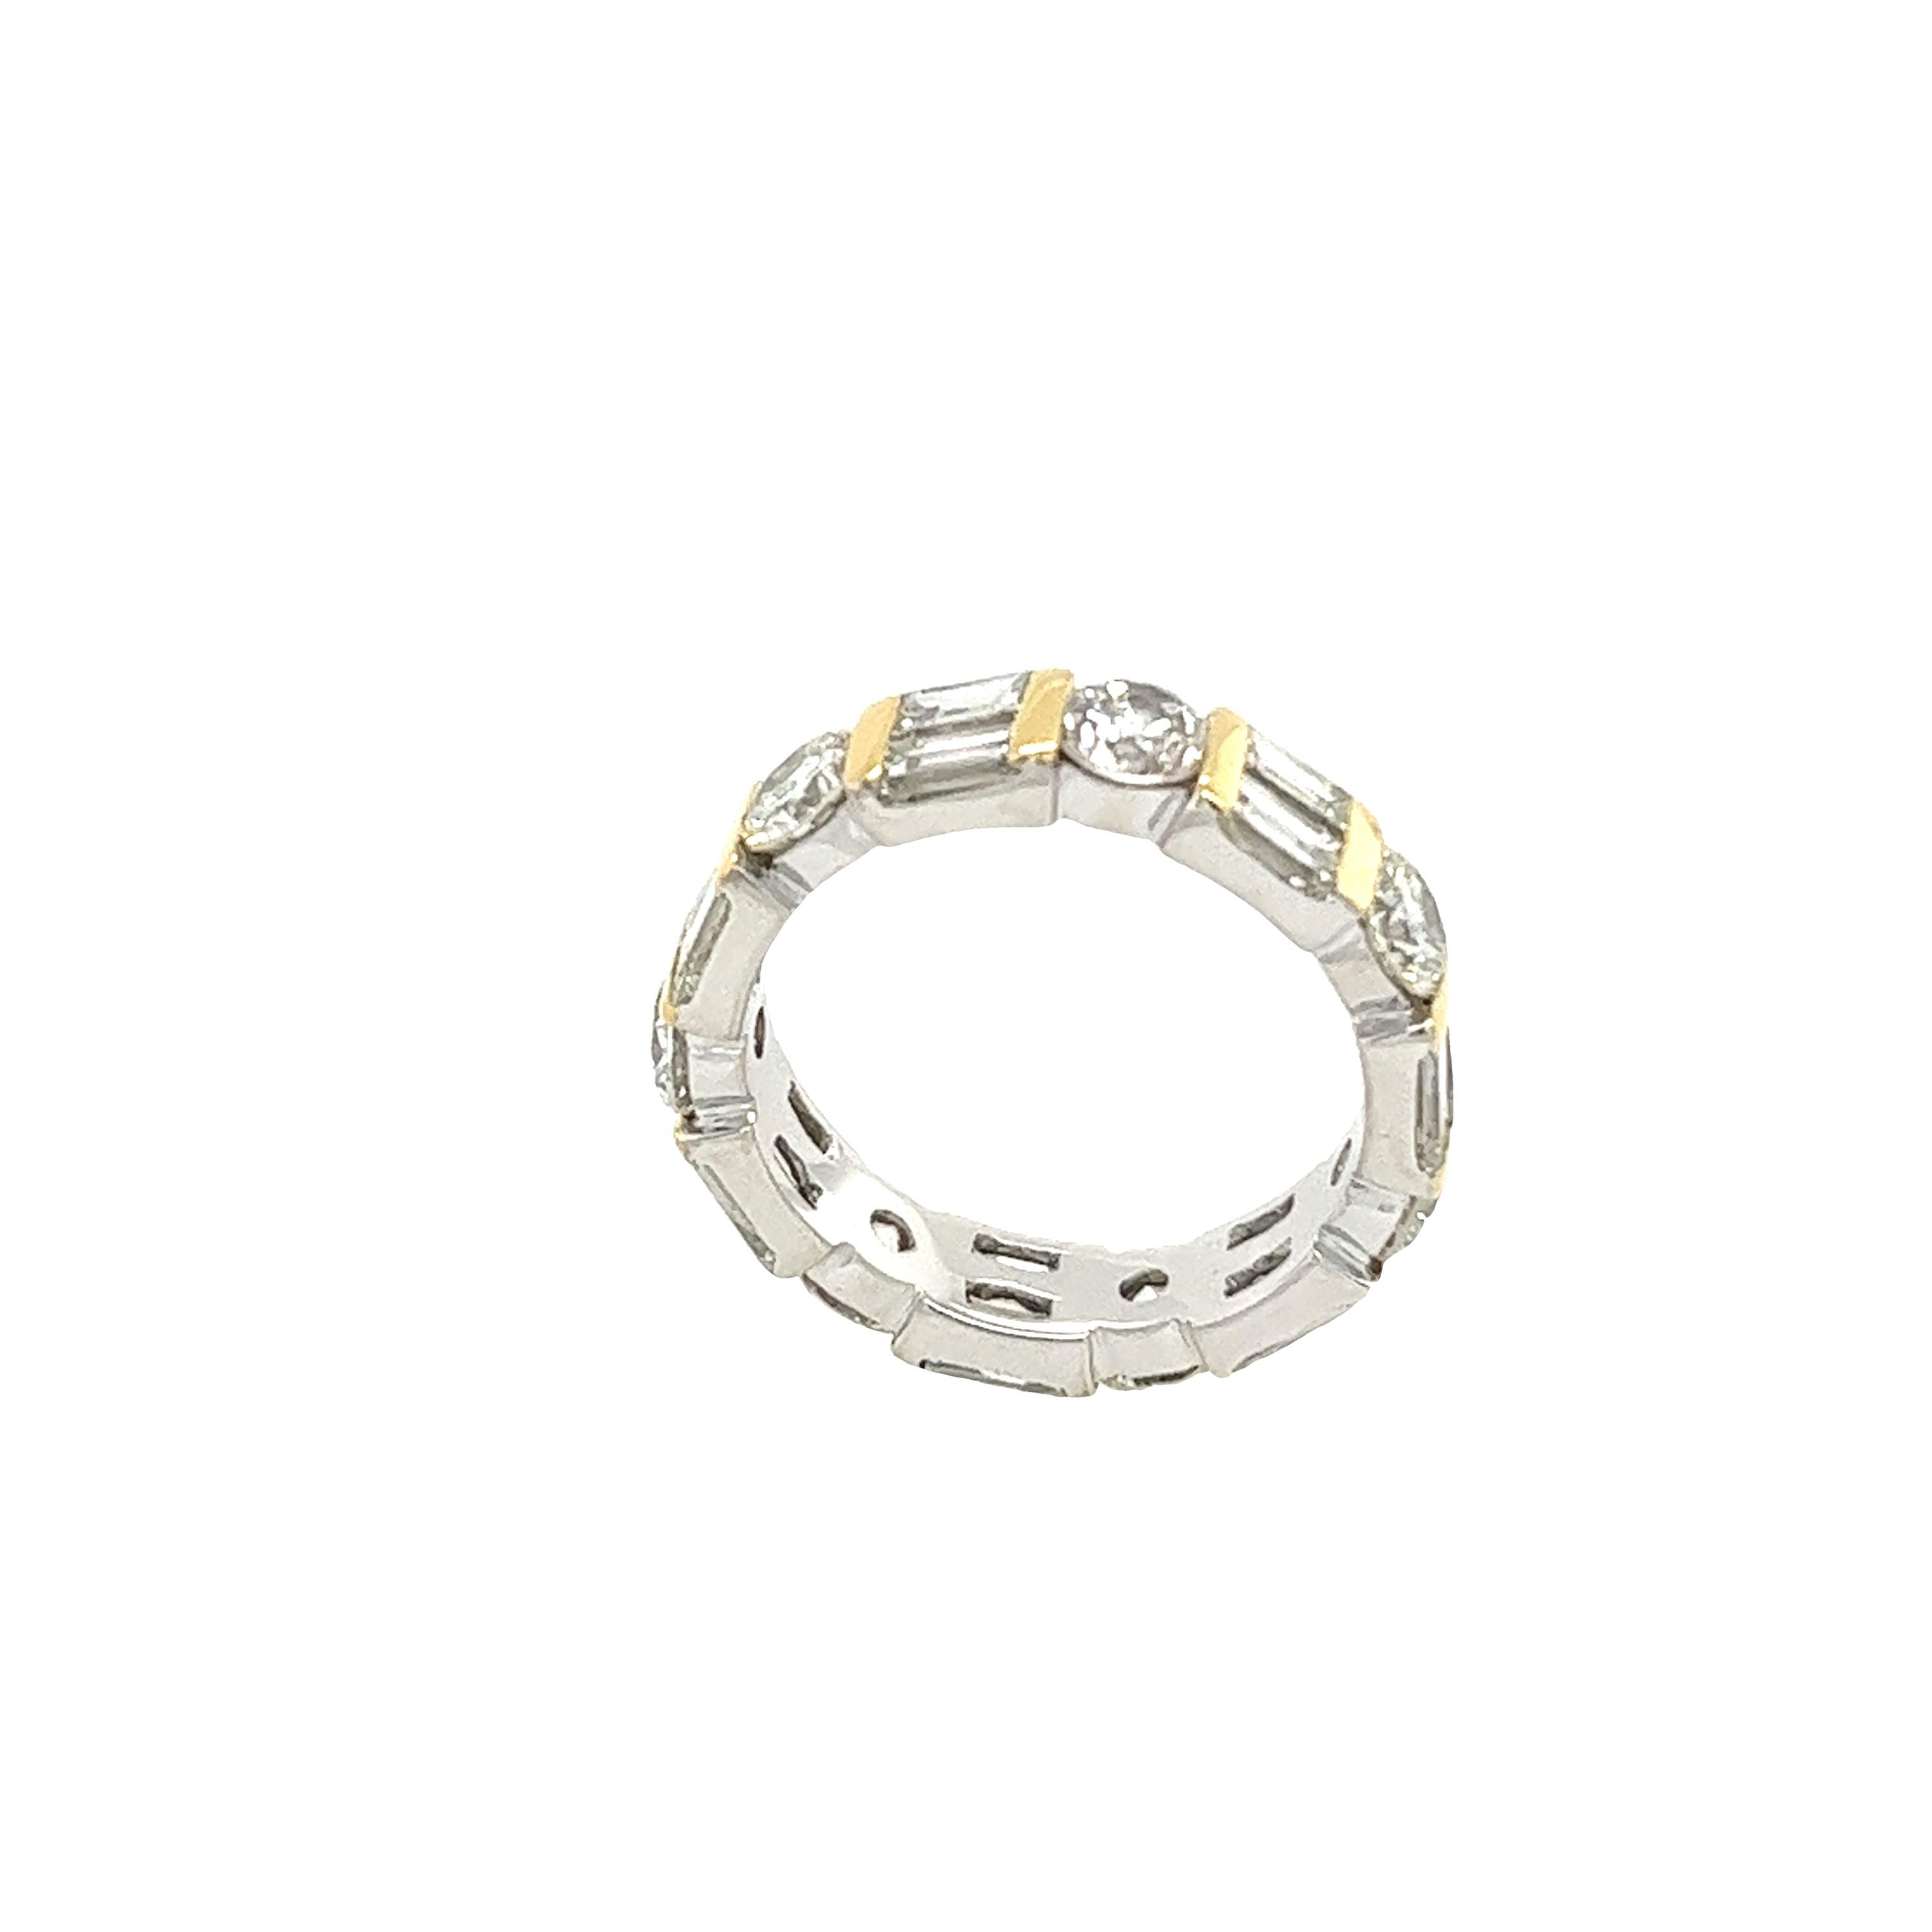 Women's 14ct White &Yellow Gold Diamond Full eternity ring set with 7 Round &14 baguette